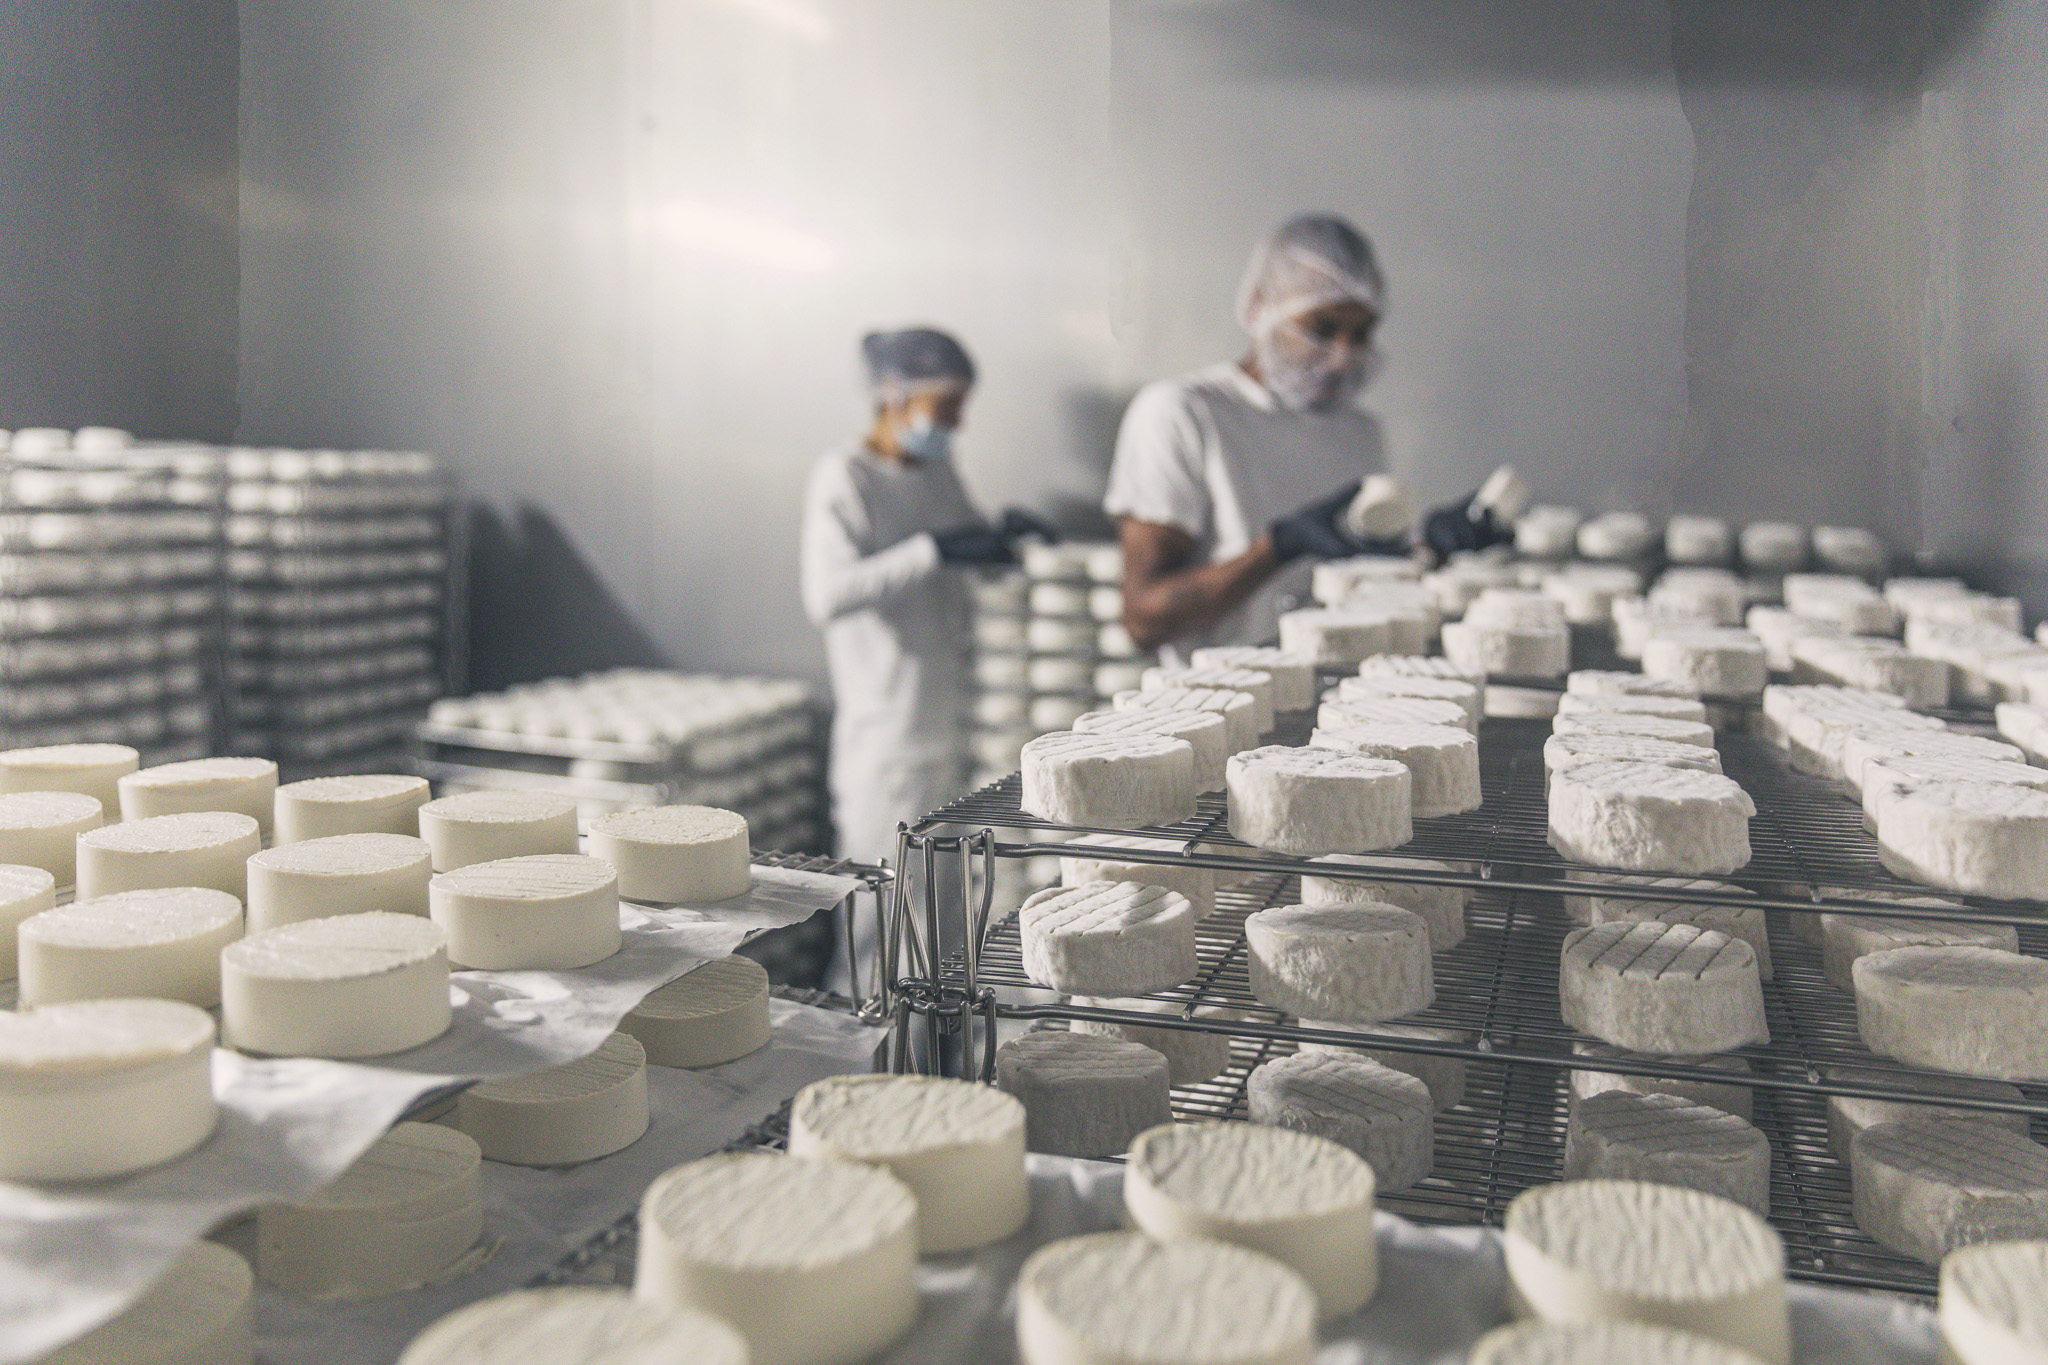 The challenges of being a vegan cheesemaker in Switzerland  – SWI swissinfo.ch